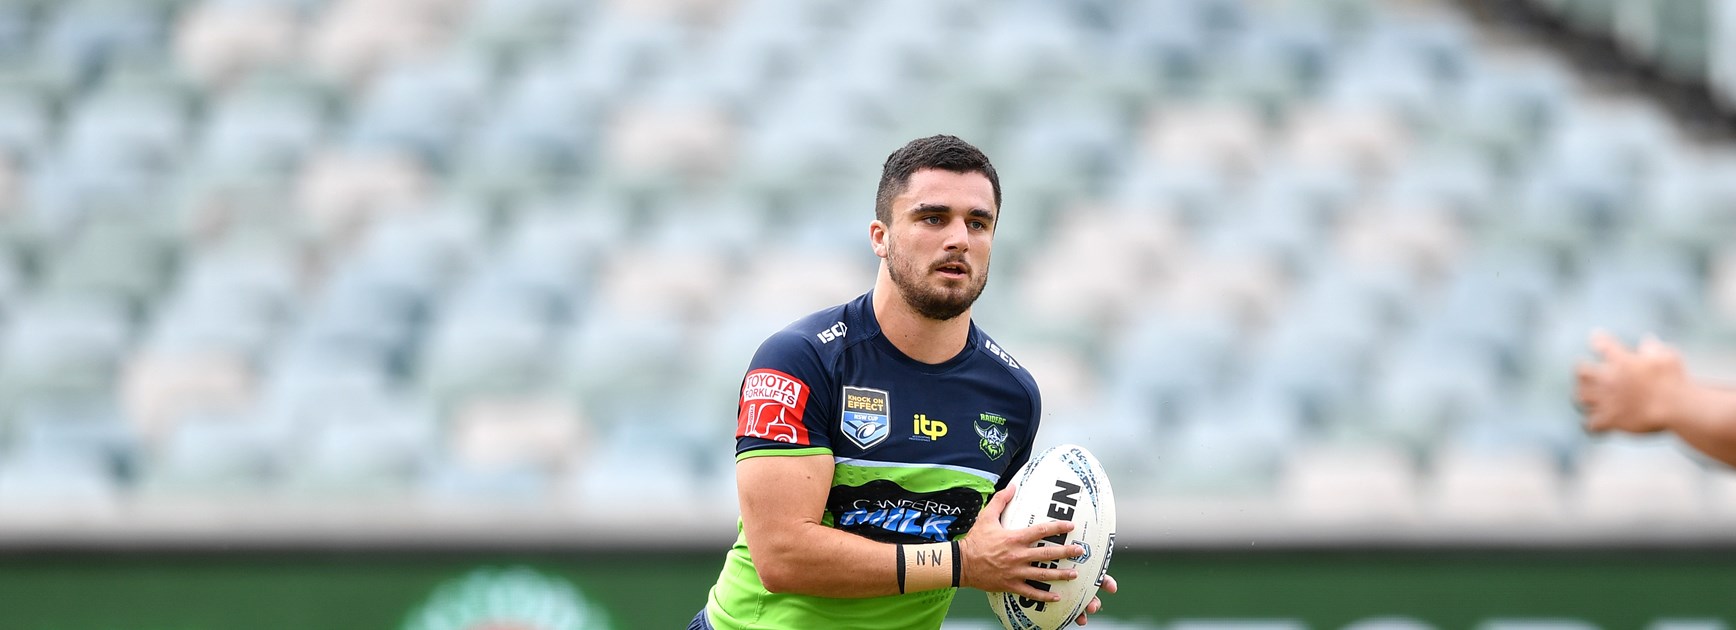 NSW Cup Team List: Raiders v Panthers